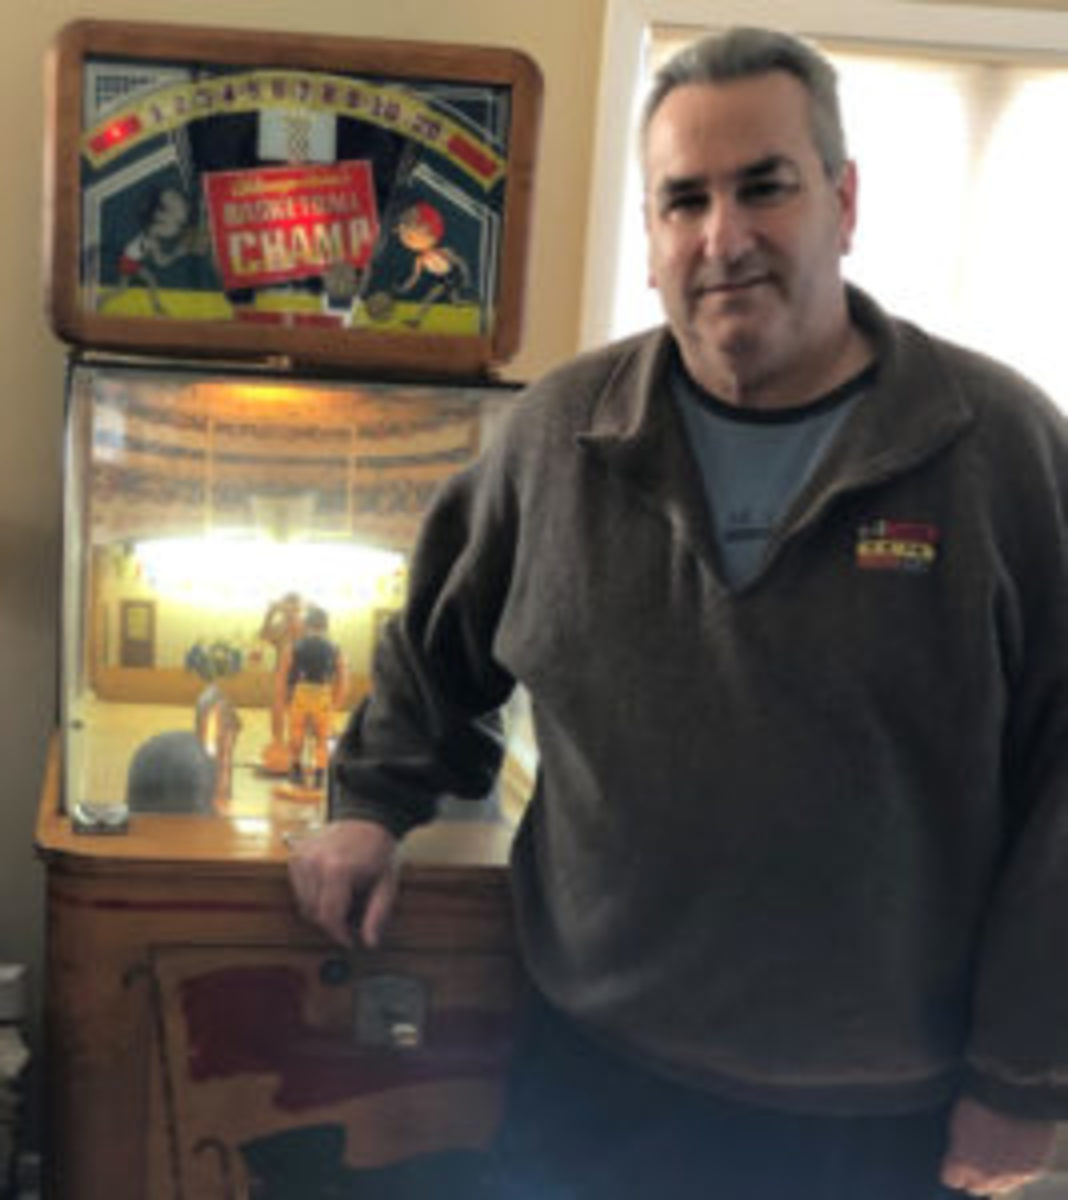  Rich Wolfin with one of his many vintage arcade machines, Basketball Champ, from 1947 by Chicago Coin.